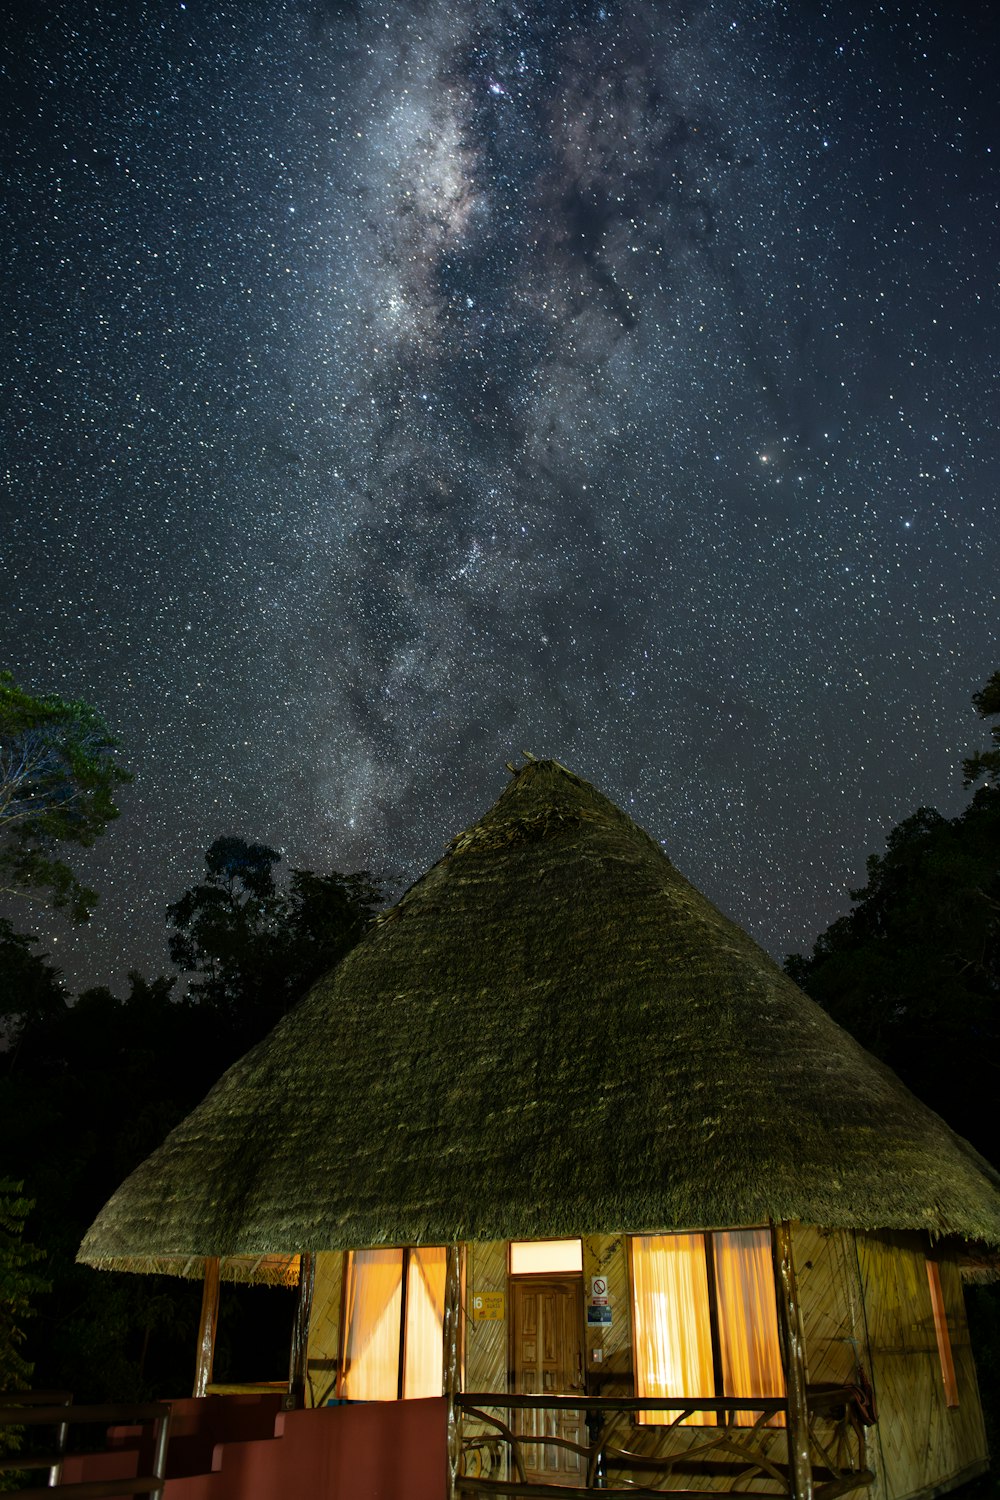 a hut with a thatched roof under a night sky filled with stars